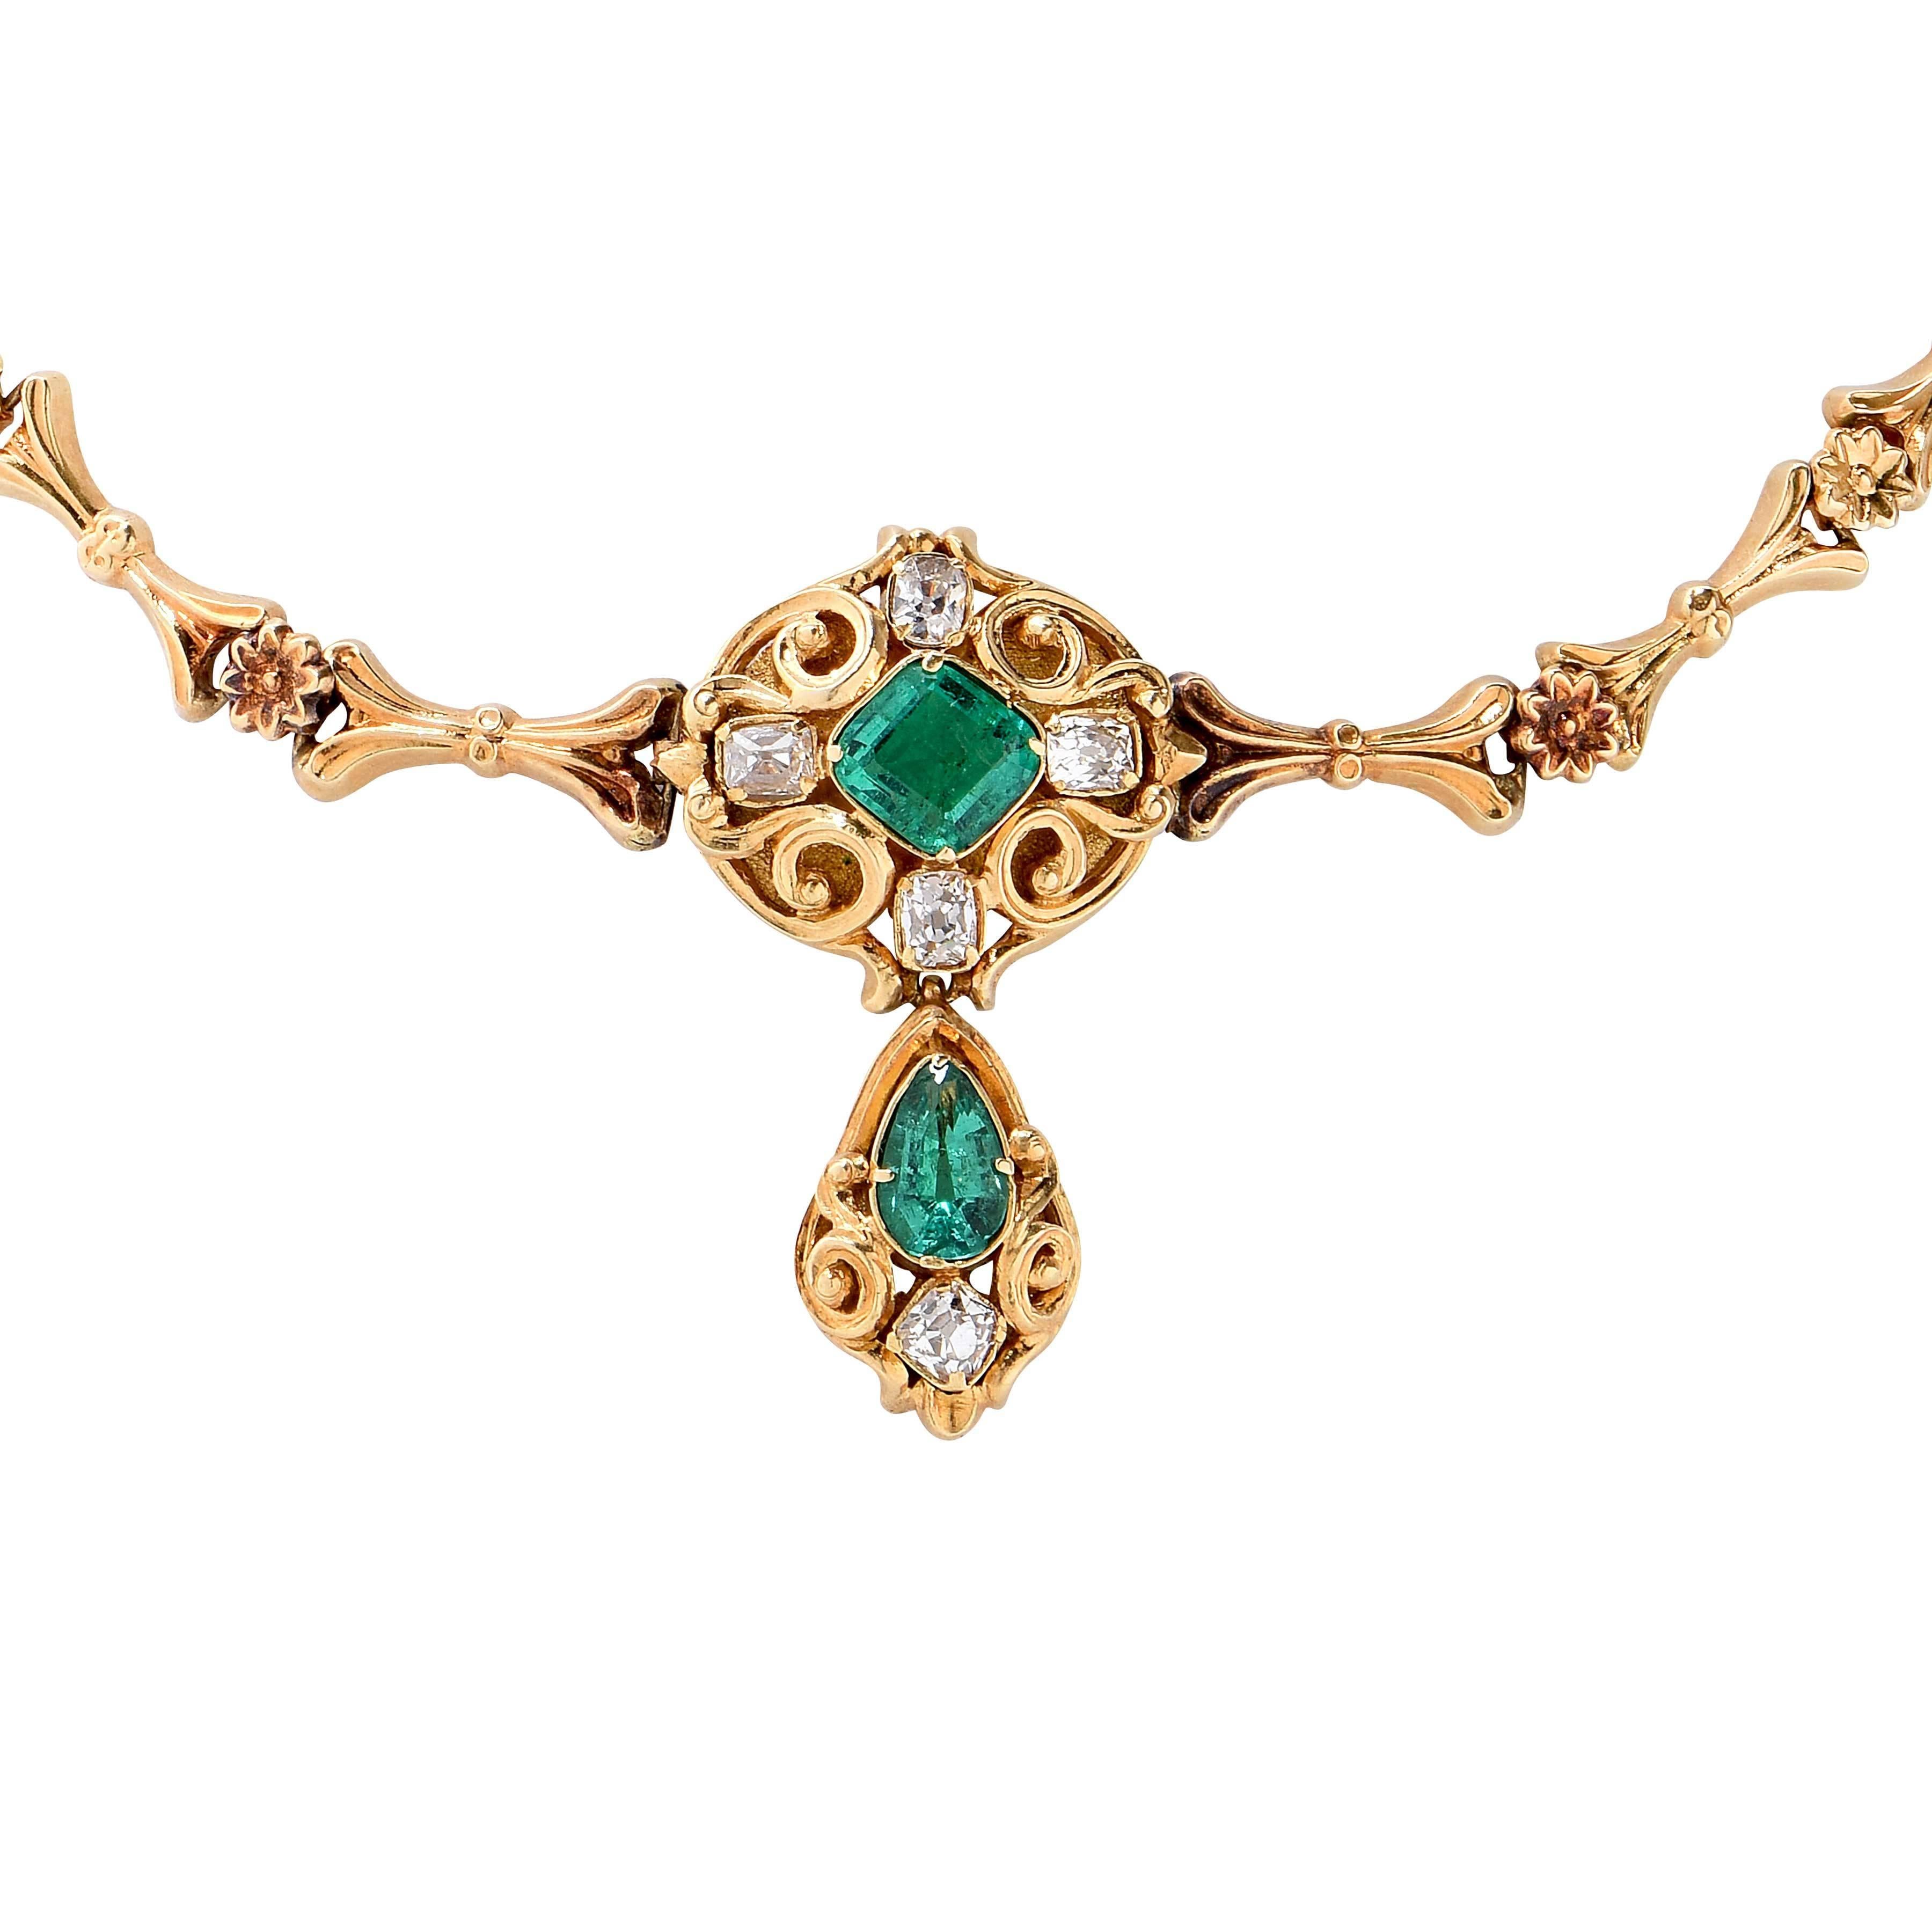 Antique Gold, Emerald and Diamond Necklace, circa 1850 For Sale